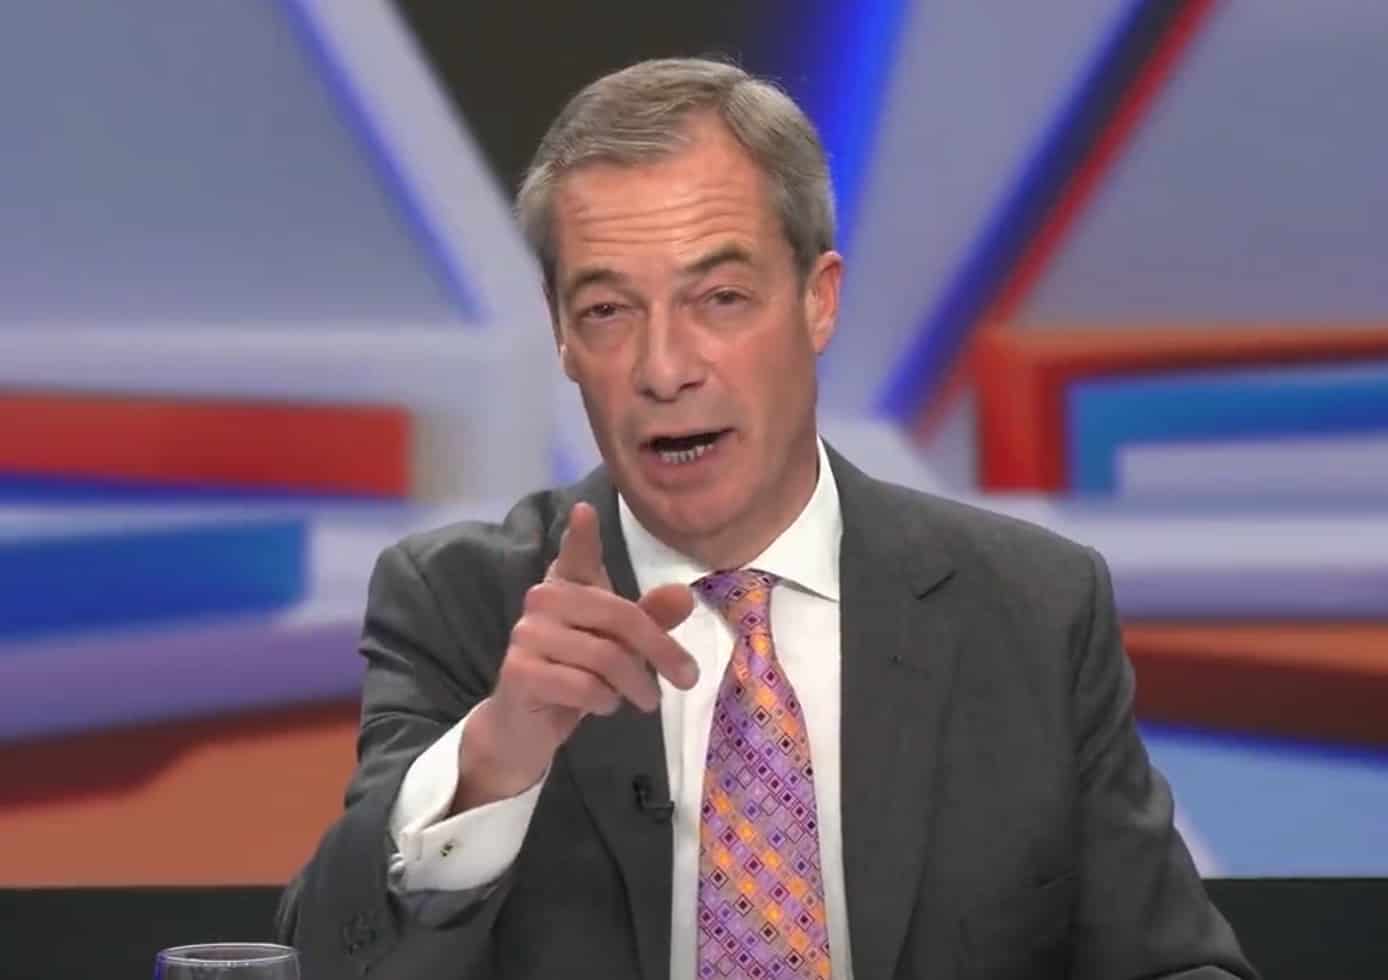 Farage responds after Labour MP uses Parliamentary privilege to call for him to be sanctioned